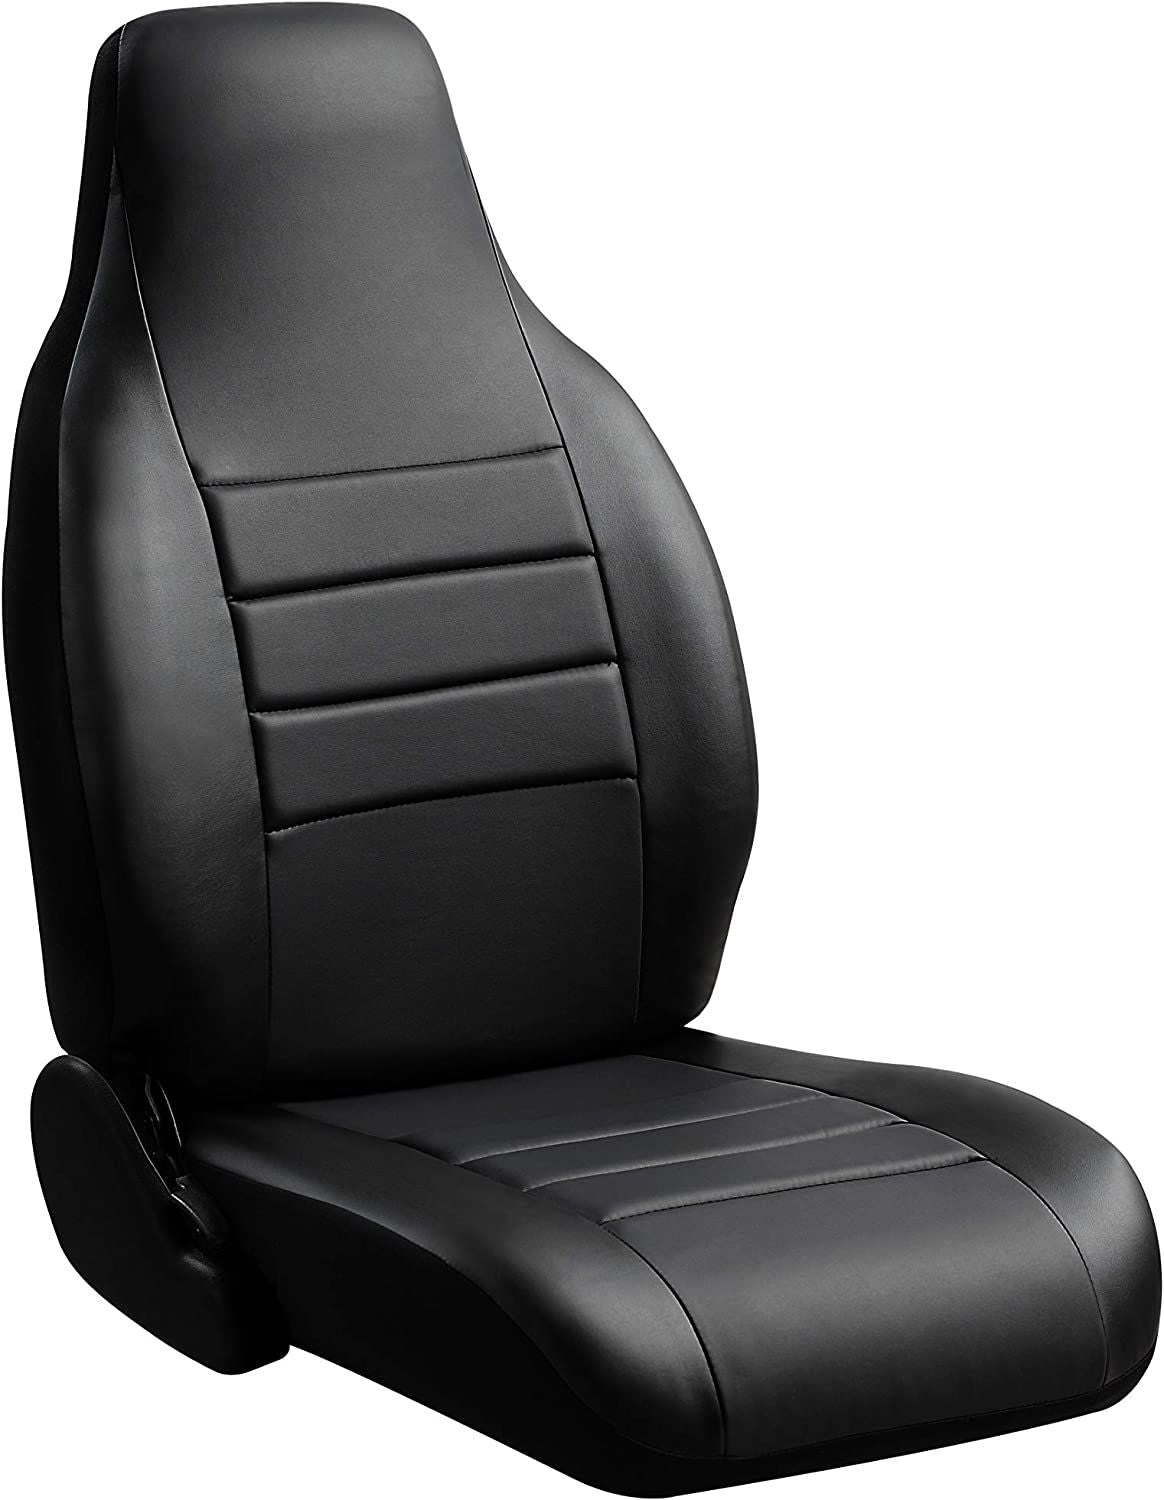 FIA® • SL69-43 BLK/BLK • LeatherLite • Soft Touch Simulated Leather Custom Fit Truck LeatherLite Seat Covers by Fia